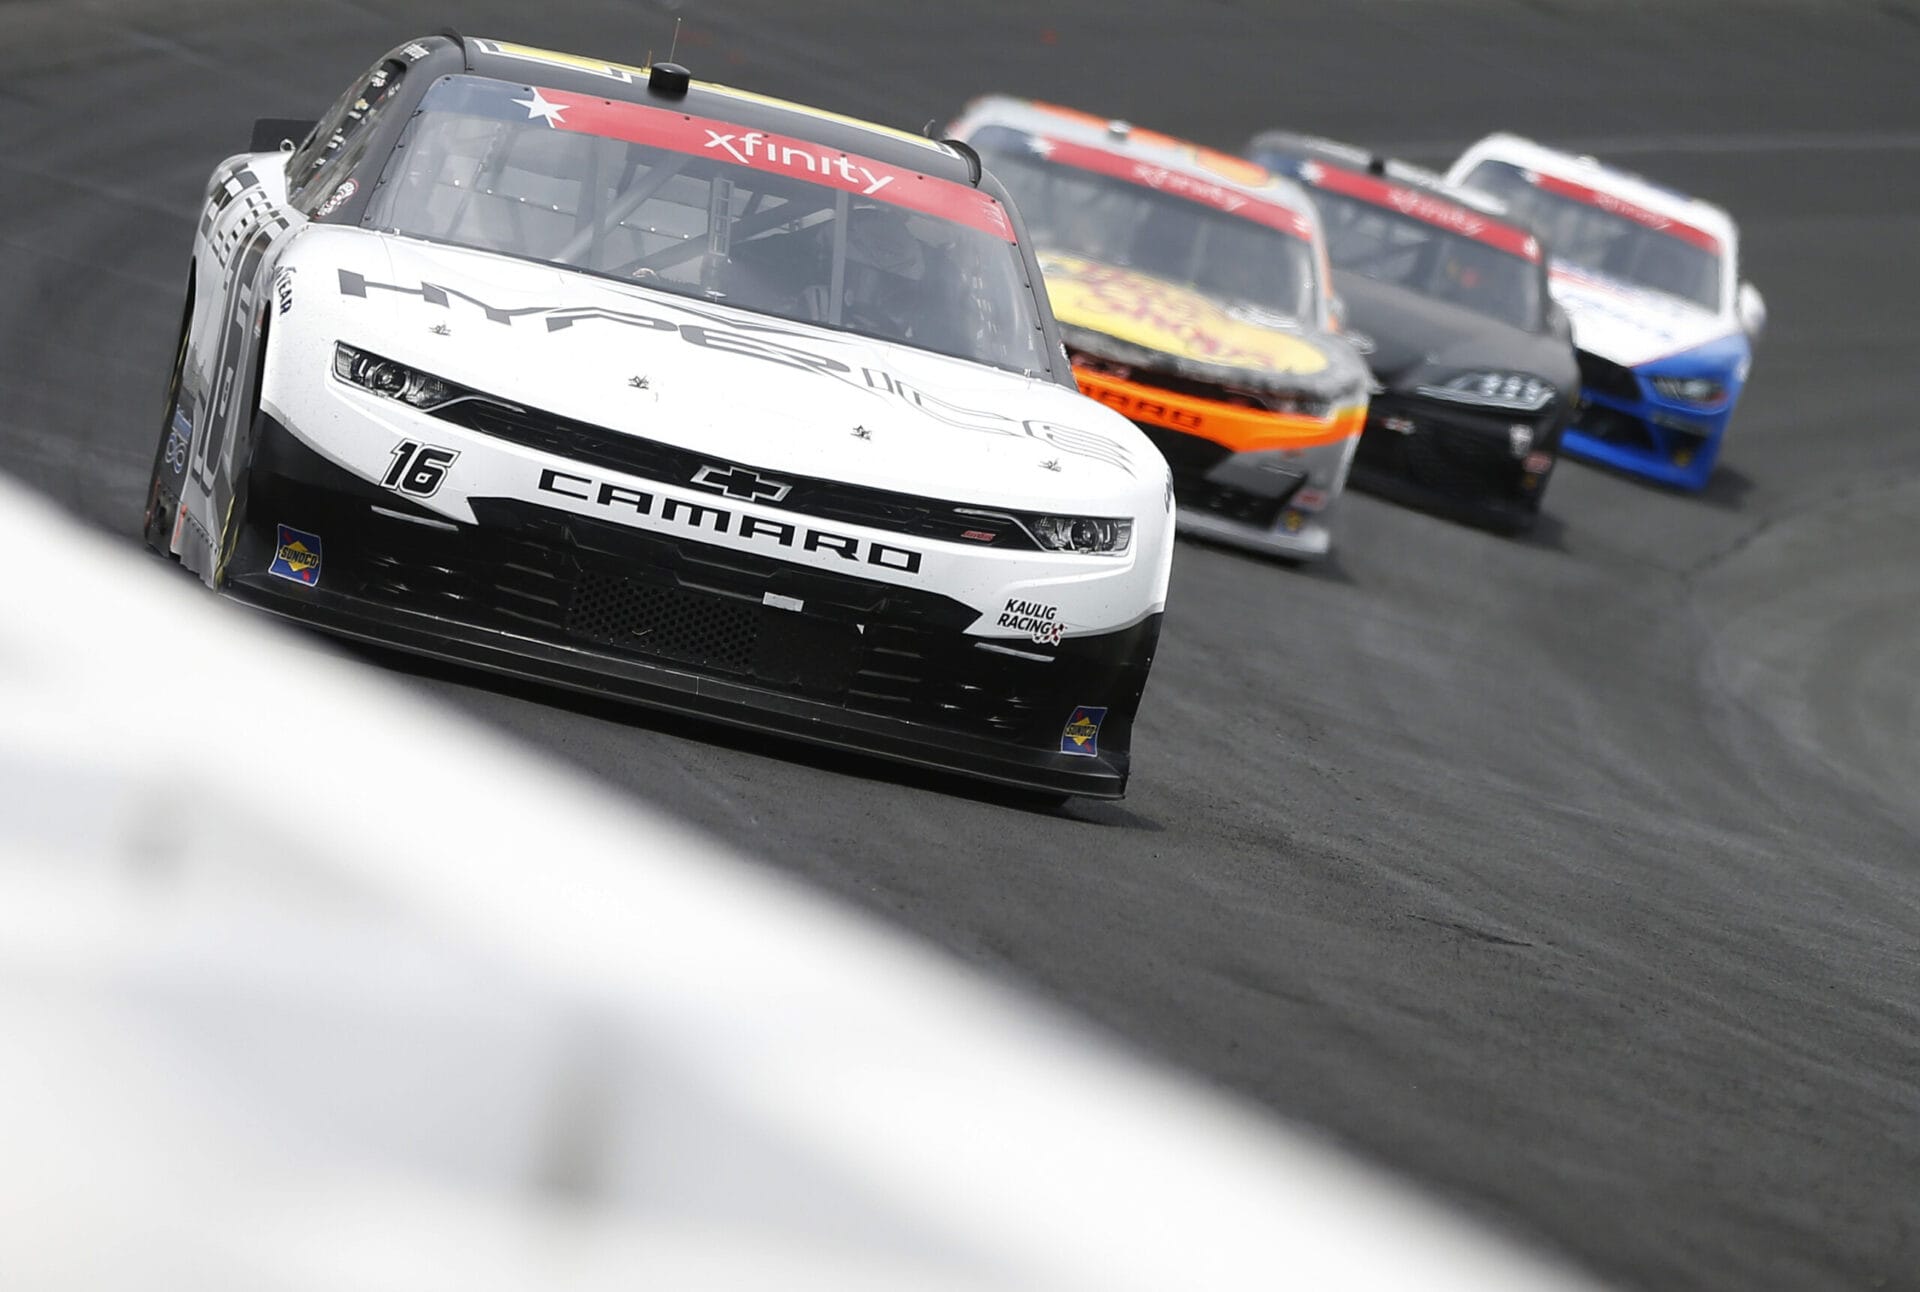 CONCORD, NORTH CAROLINA - MAY 29: AJ Allmendinger, driver of the #16 Hyperice Chevrolet, leads the field during the NASCAR Xfinity Series Alsco Uniforms 300 at Charlotte Motor Speedway on May 29, 2021 in Concord, North Carolina.